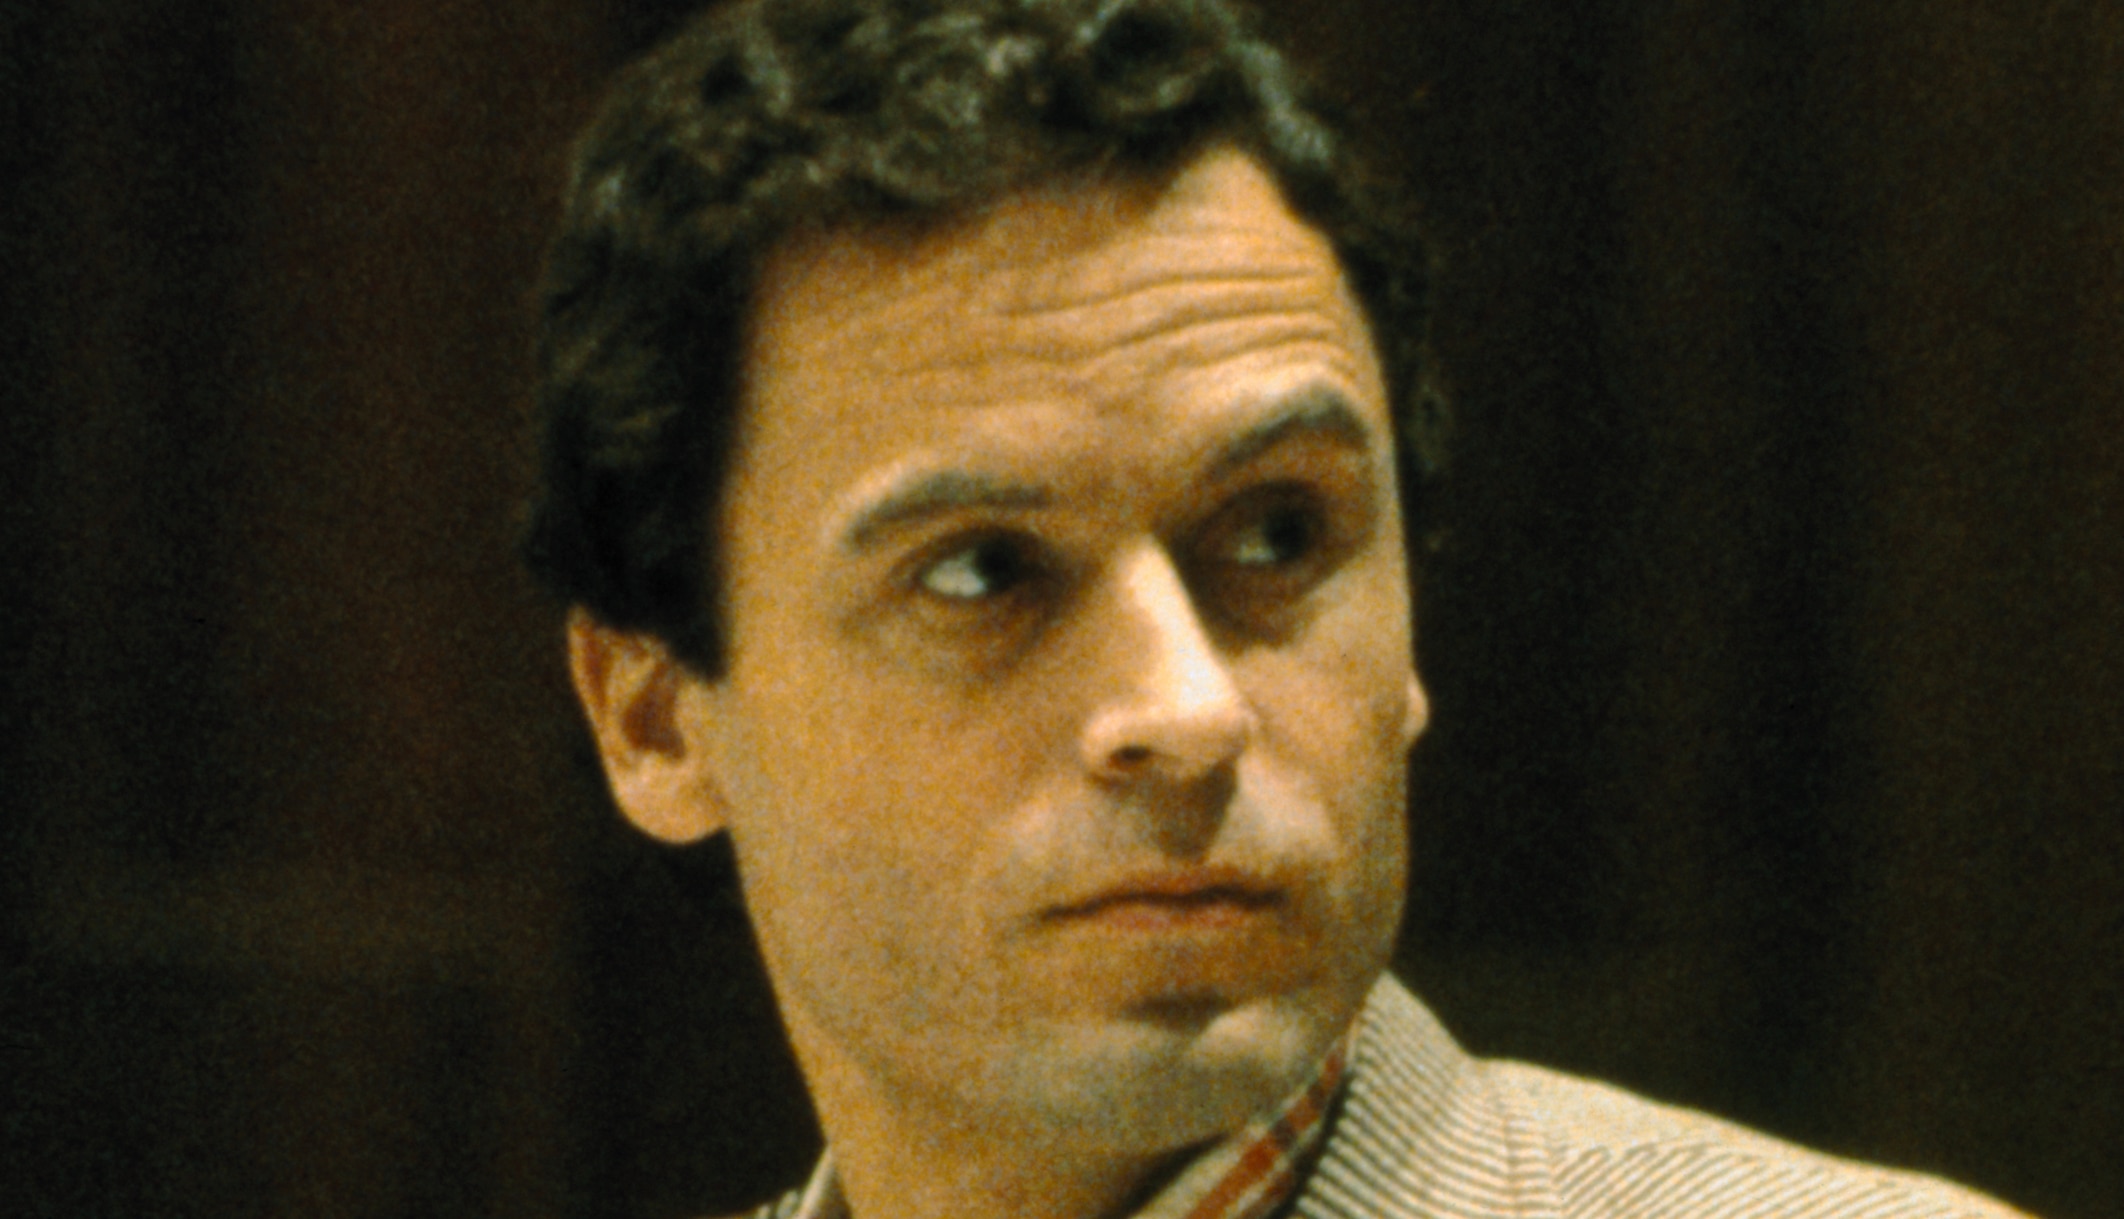 ted-bundy-interviews-7-chilling-clips-of-the-serial-killer-crime-time